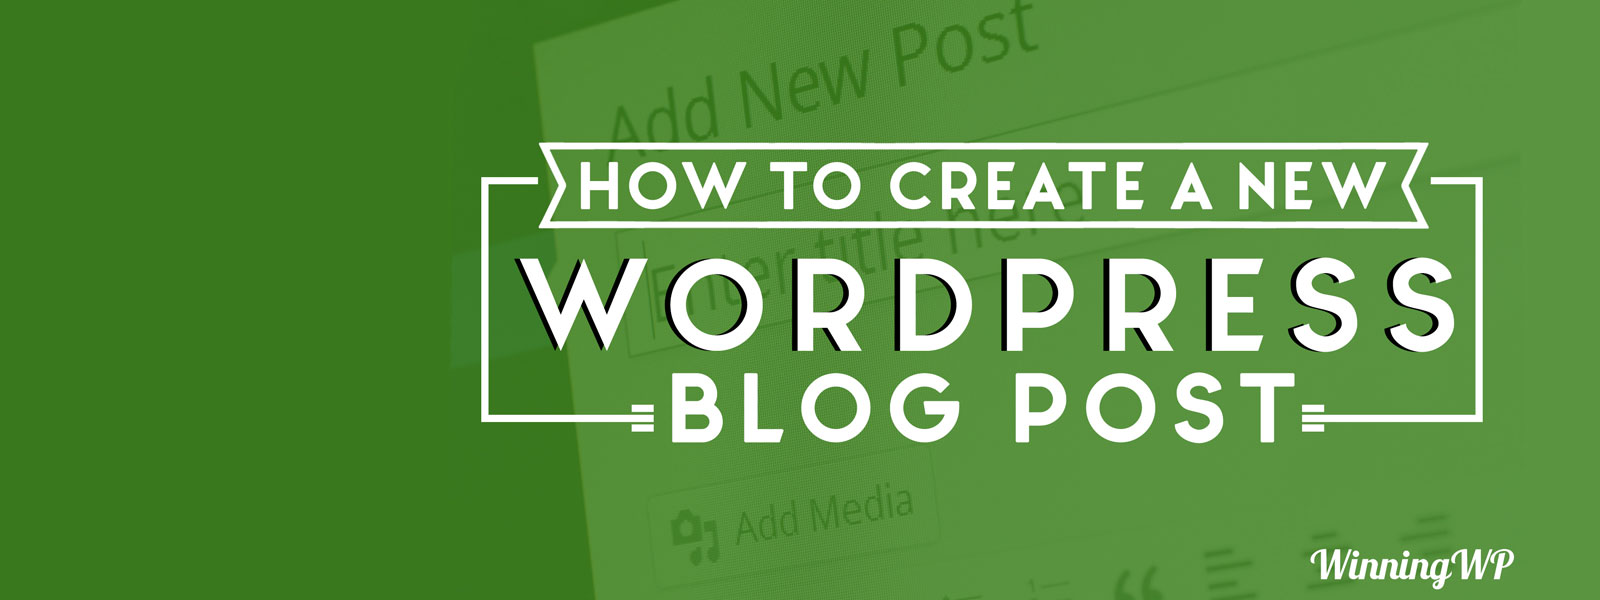 How to Create a New WordPress Blog Post